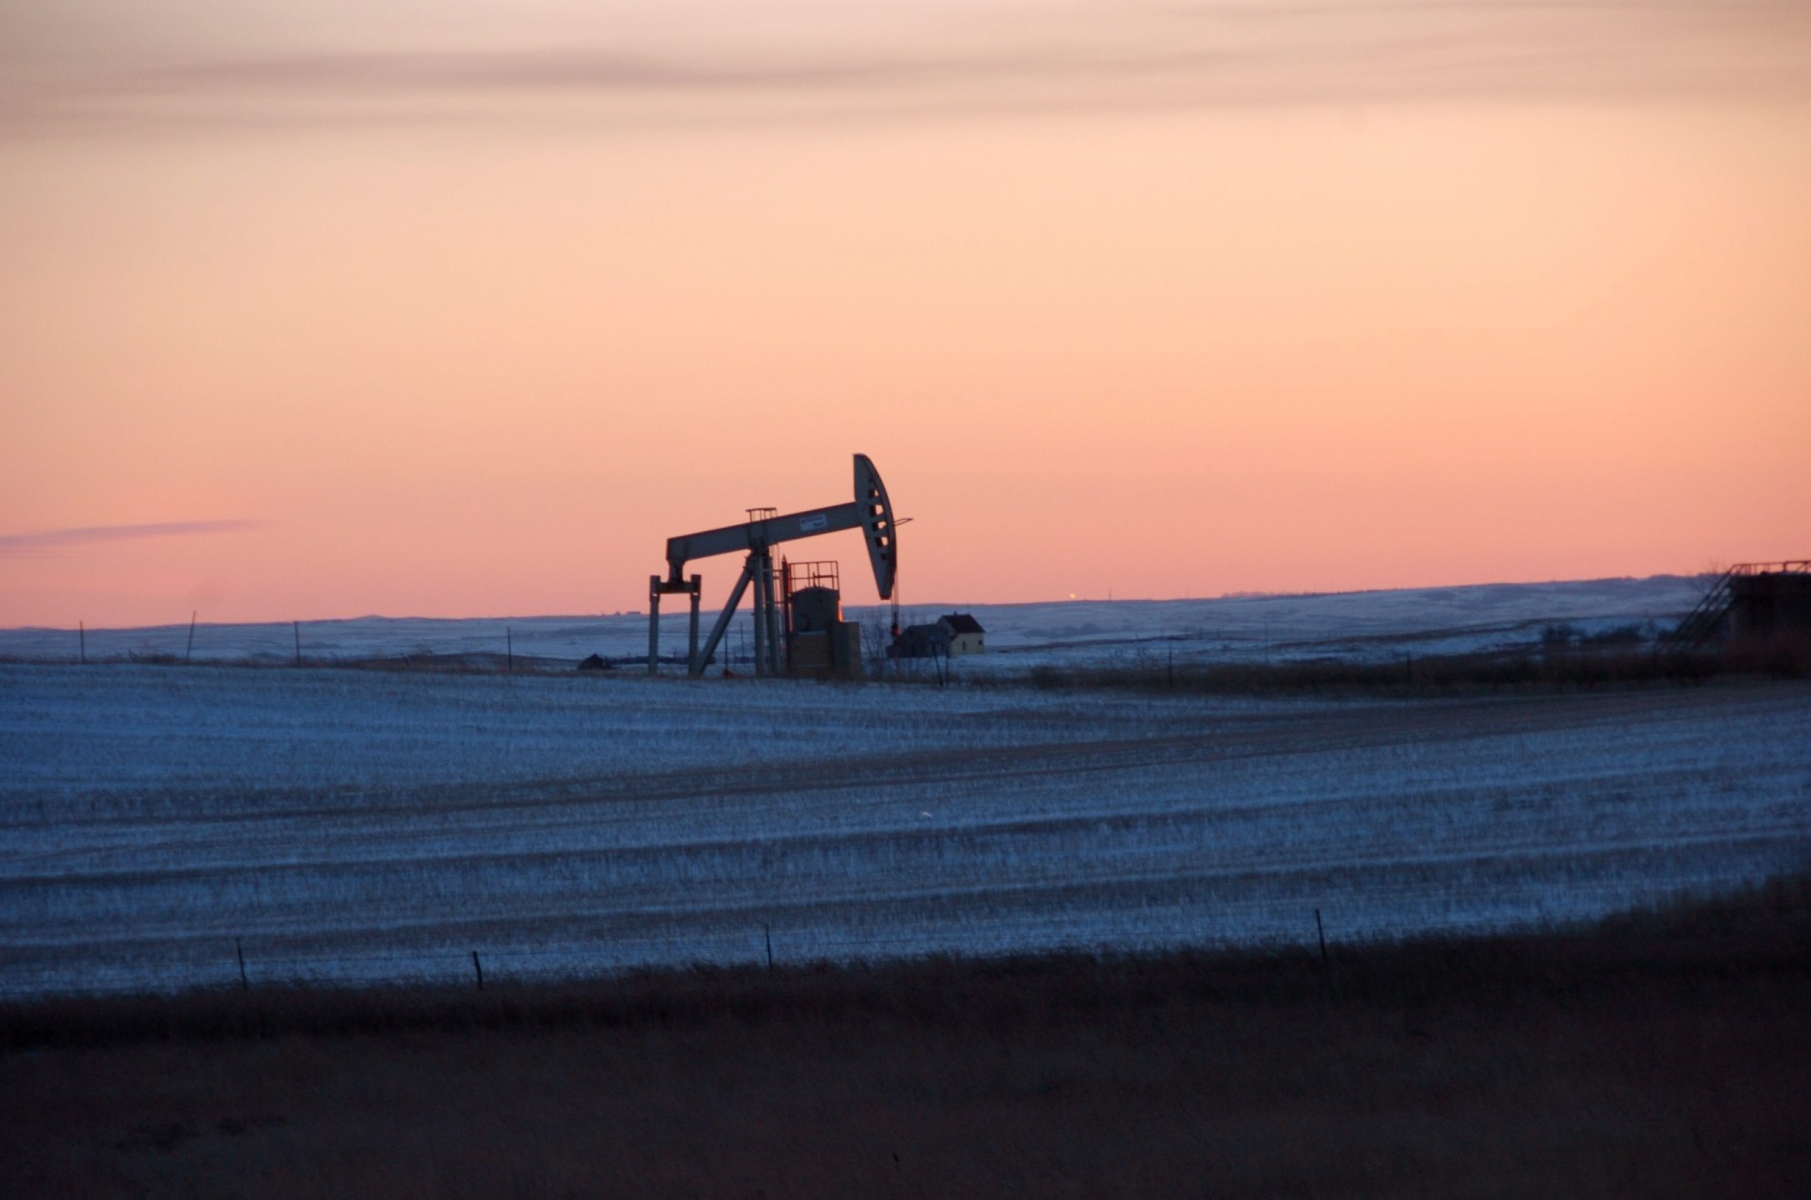 In this Feb. 25, 2015 photo, a pump jack for pulling oil from the ground is seen near New Town, N.D. A team led by researchers at the University of Michigan has found that fossil fuel production at the Bakken Formation in North Dakota and Montana is emitting roughly 2 percent of the ethane detected in the Earth's atmosphere. Along with its chemical cousin methane, ethane is a hydrocarbon that is a significant component of natural gas. Once in the atmosphere, ethane reacts with sunlight to form ozone.(AP Photo/Matthew Brown) Ethane Pollution